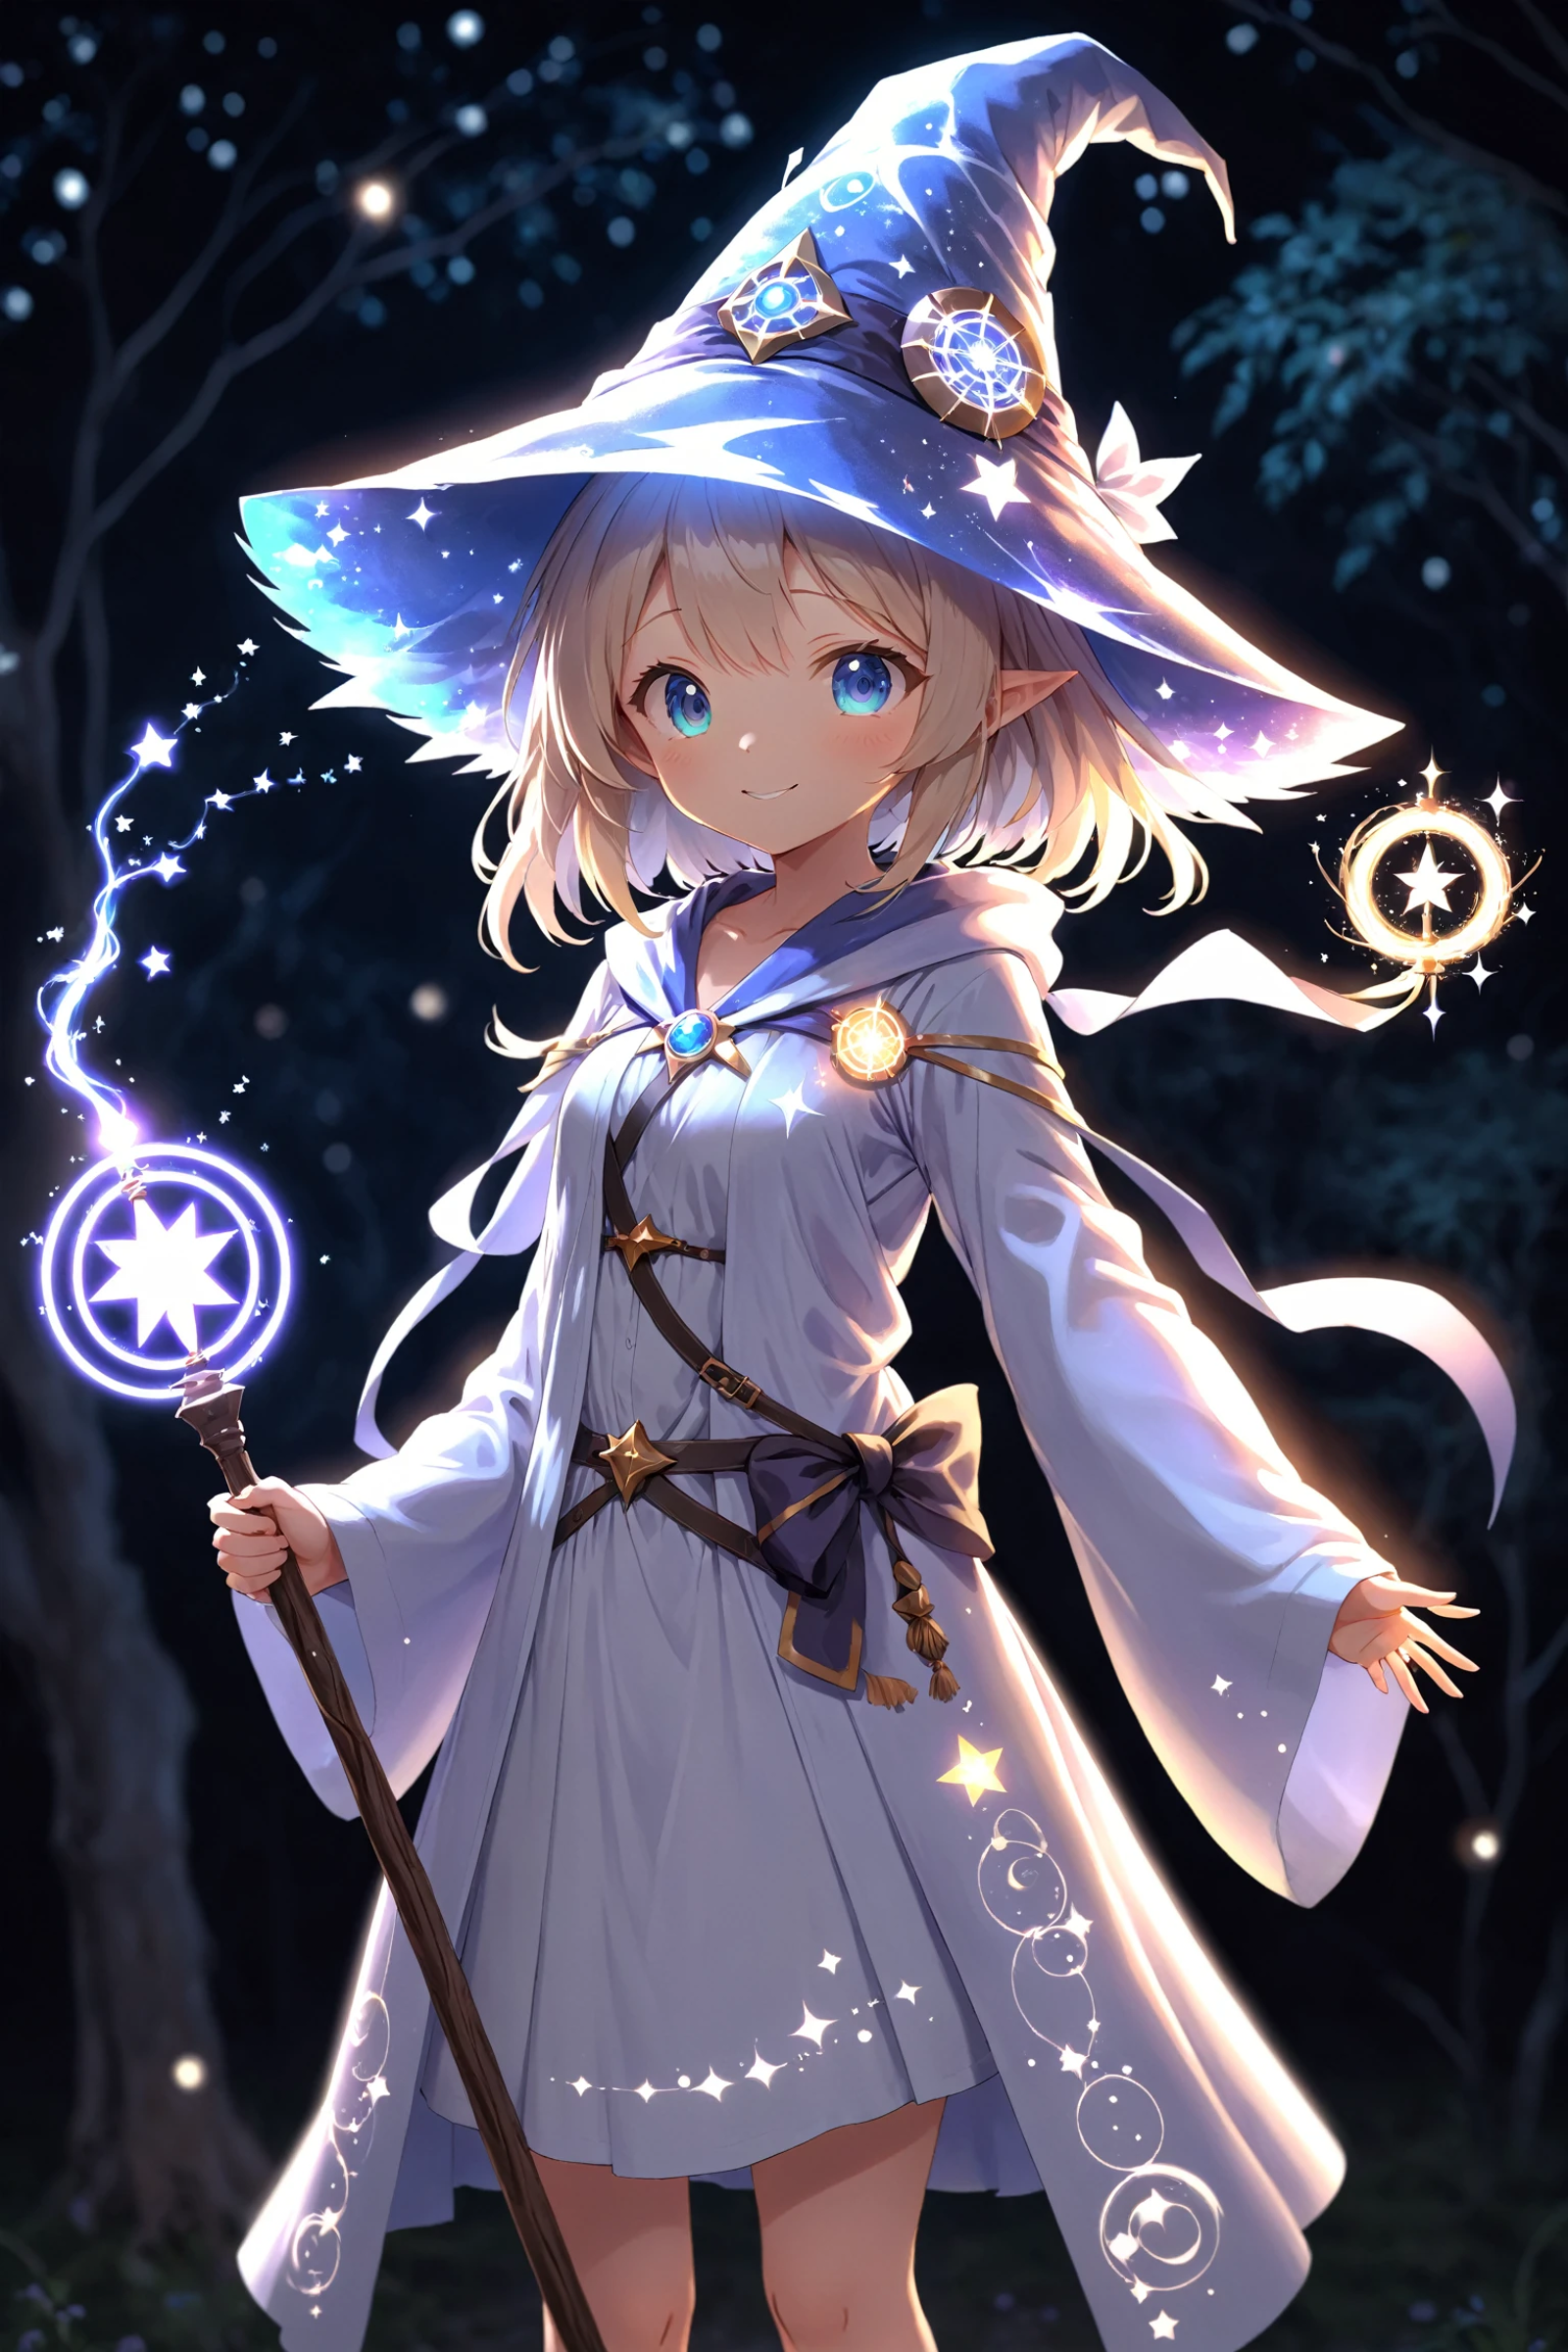 A beautiful, young woman dressed in a flowing white dress, holding a wand and wearing a witch's hat.